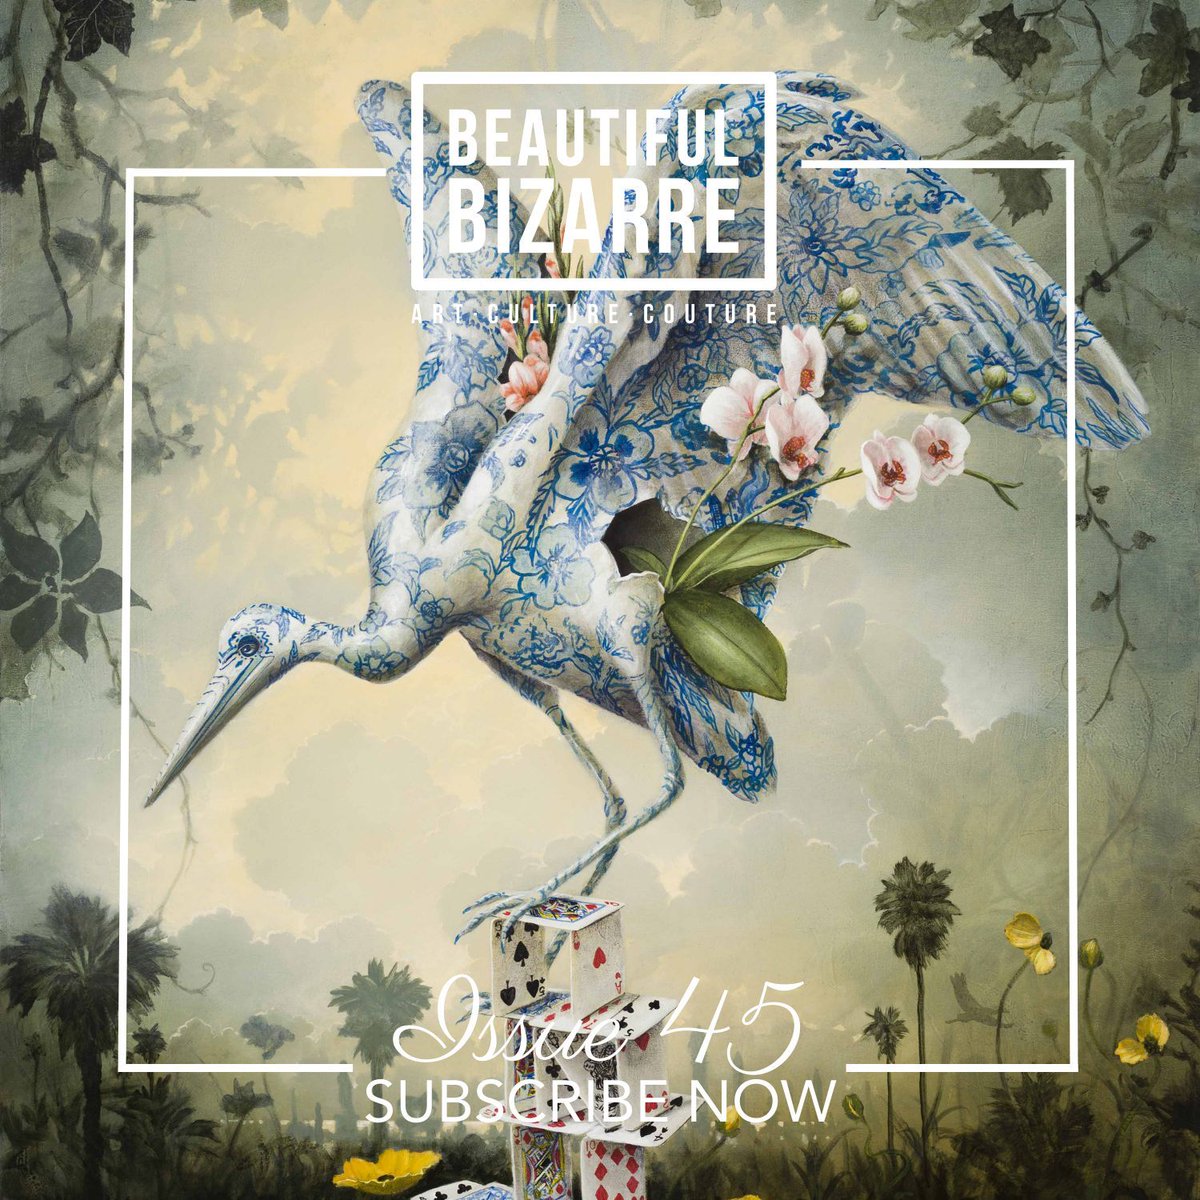 Read about @kevinpsloan and his work in the coming June issue of Beautiful Bizarre art magazine!

Never miss an issue again. Subscribe today > store.beautifulbizarre.net/product/12-mon…

#beautifulbizarre #artmagazine #artist #newcontemporaryart #artinspiration #acrylicpainting #wildlife #birdart